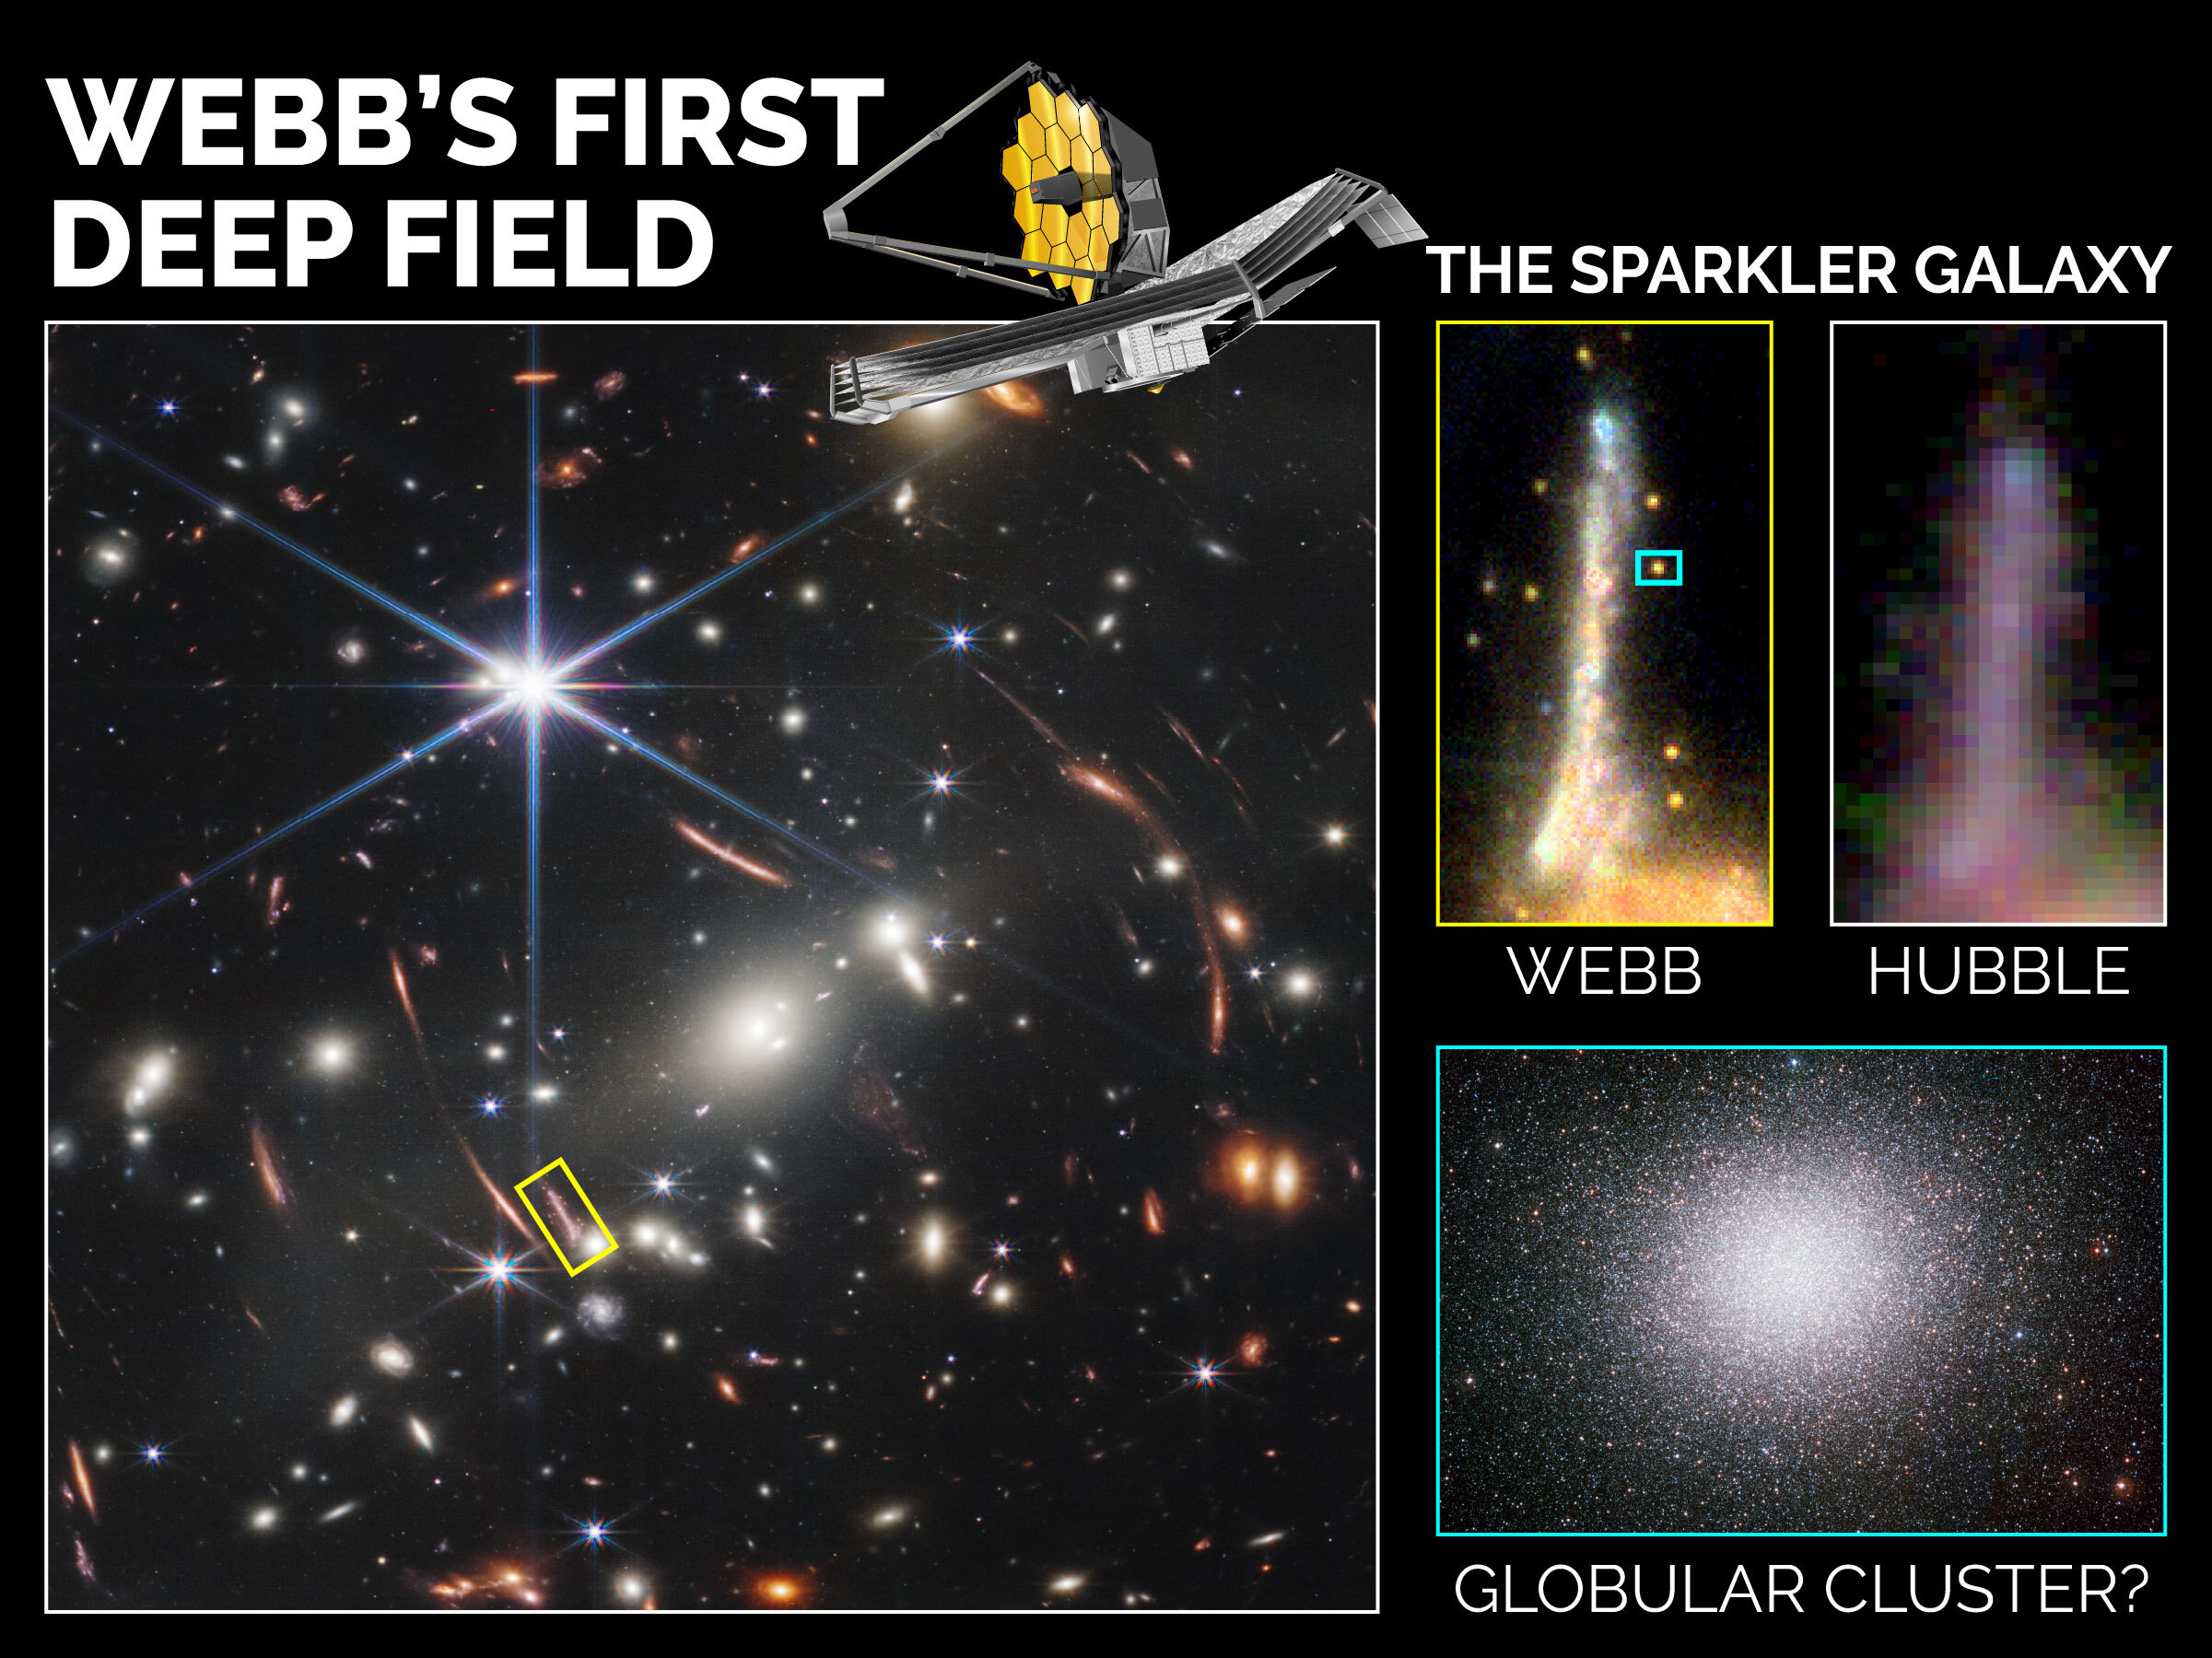 Five of the sparkling objects that are located around the Sparkler galaxy in Webb's First Deep Field are globular clusters, according to the research. Credit: Canadian Space Agency with images from NASA, ESA, CSA, STScI; Mowla, Iyer, et al. 2022